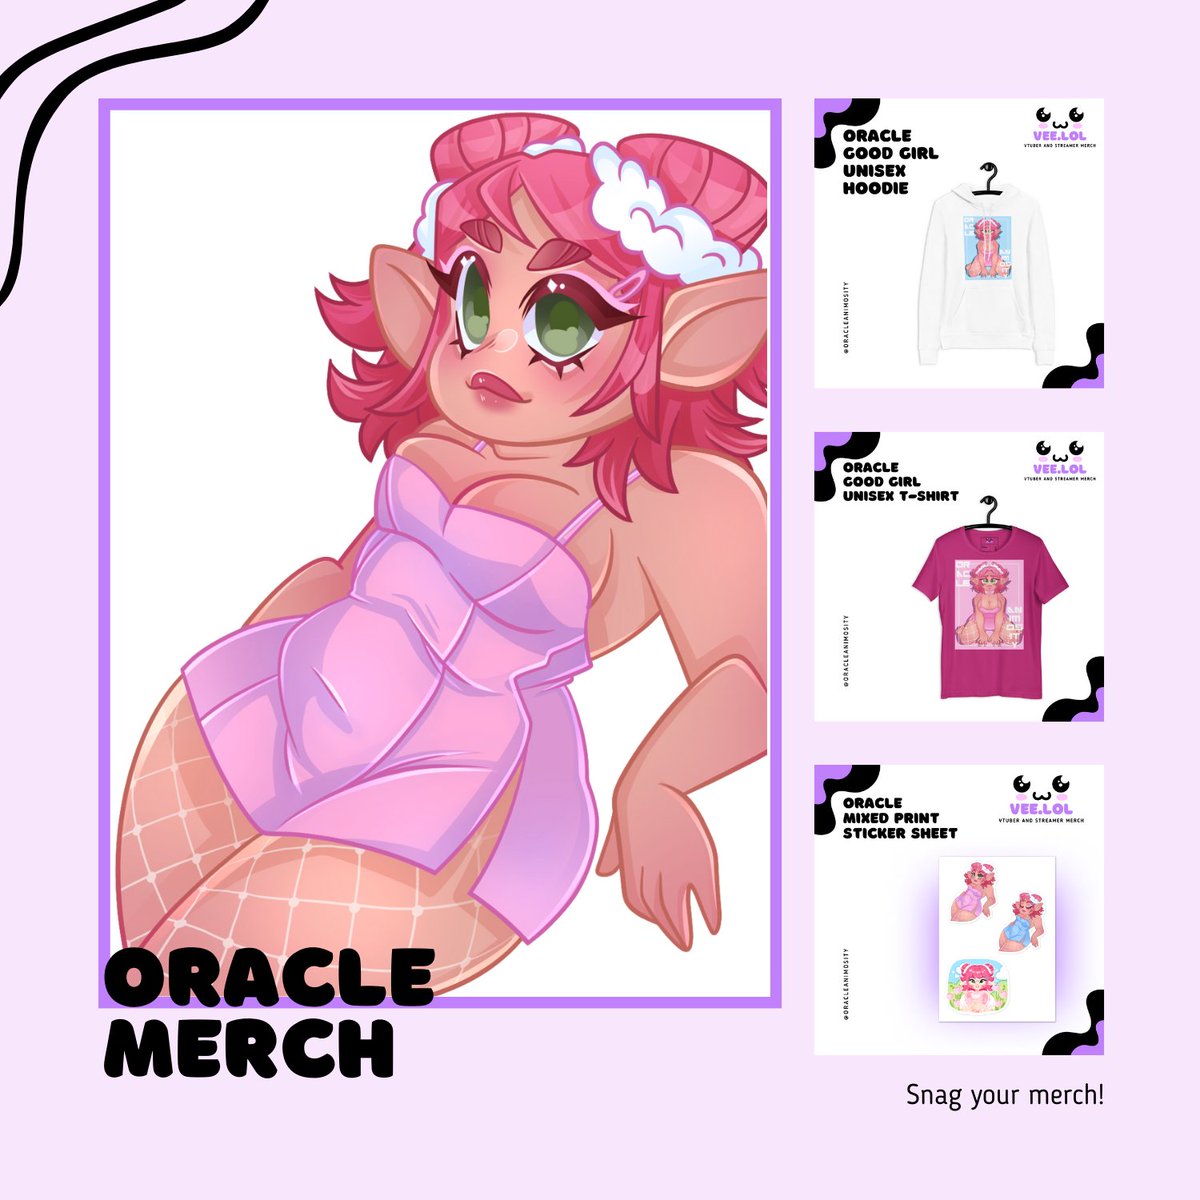 ⋆｡‧˚ʚ Grab some cute apparel from @OracleAnimosity's shop! ɞ˚‧｡⋆  

⇢ Don't forget to tag us in the merch you snagged!  

#VtuberEN #VTuberUprising #MerchDrop #VTuberAssets